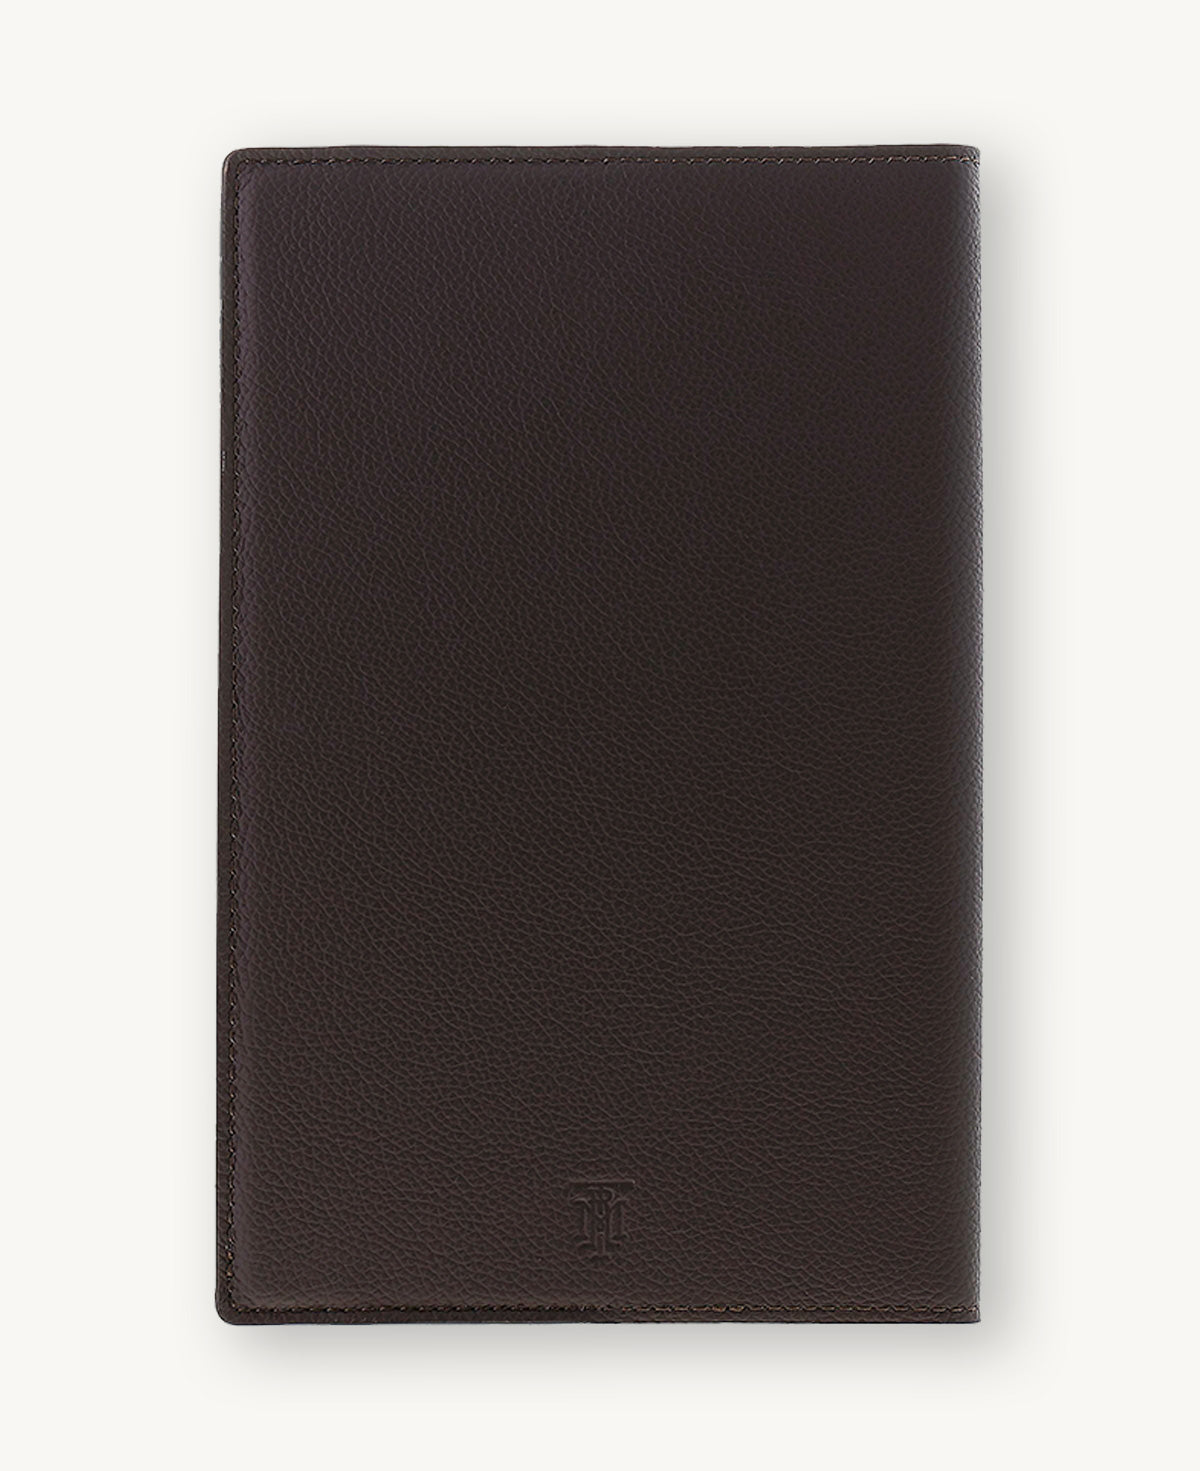 NOTEBOOK SMALL BROWN